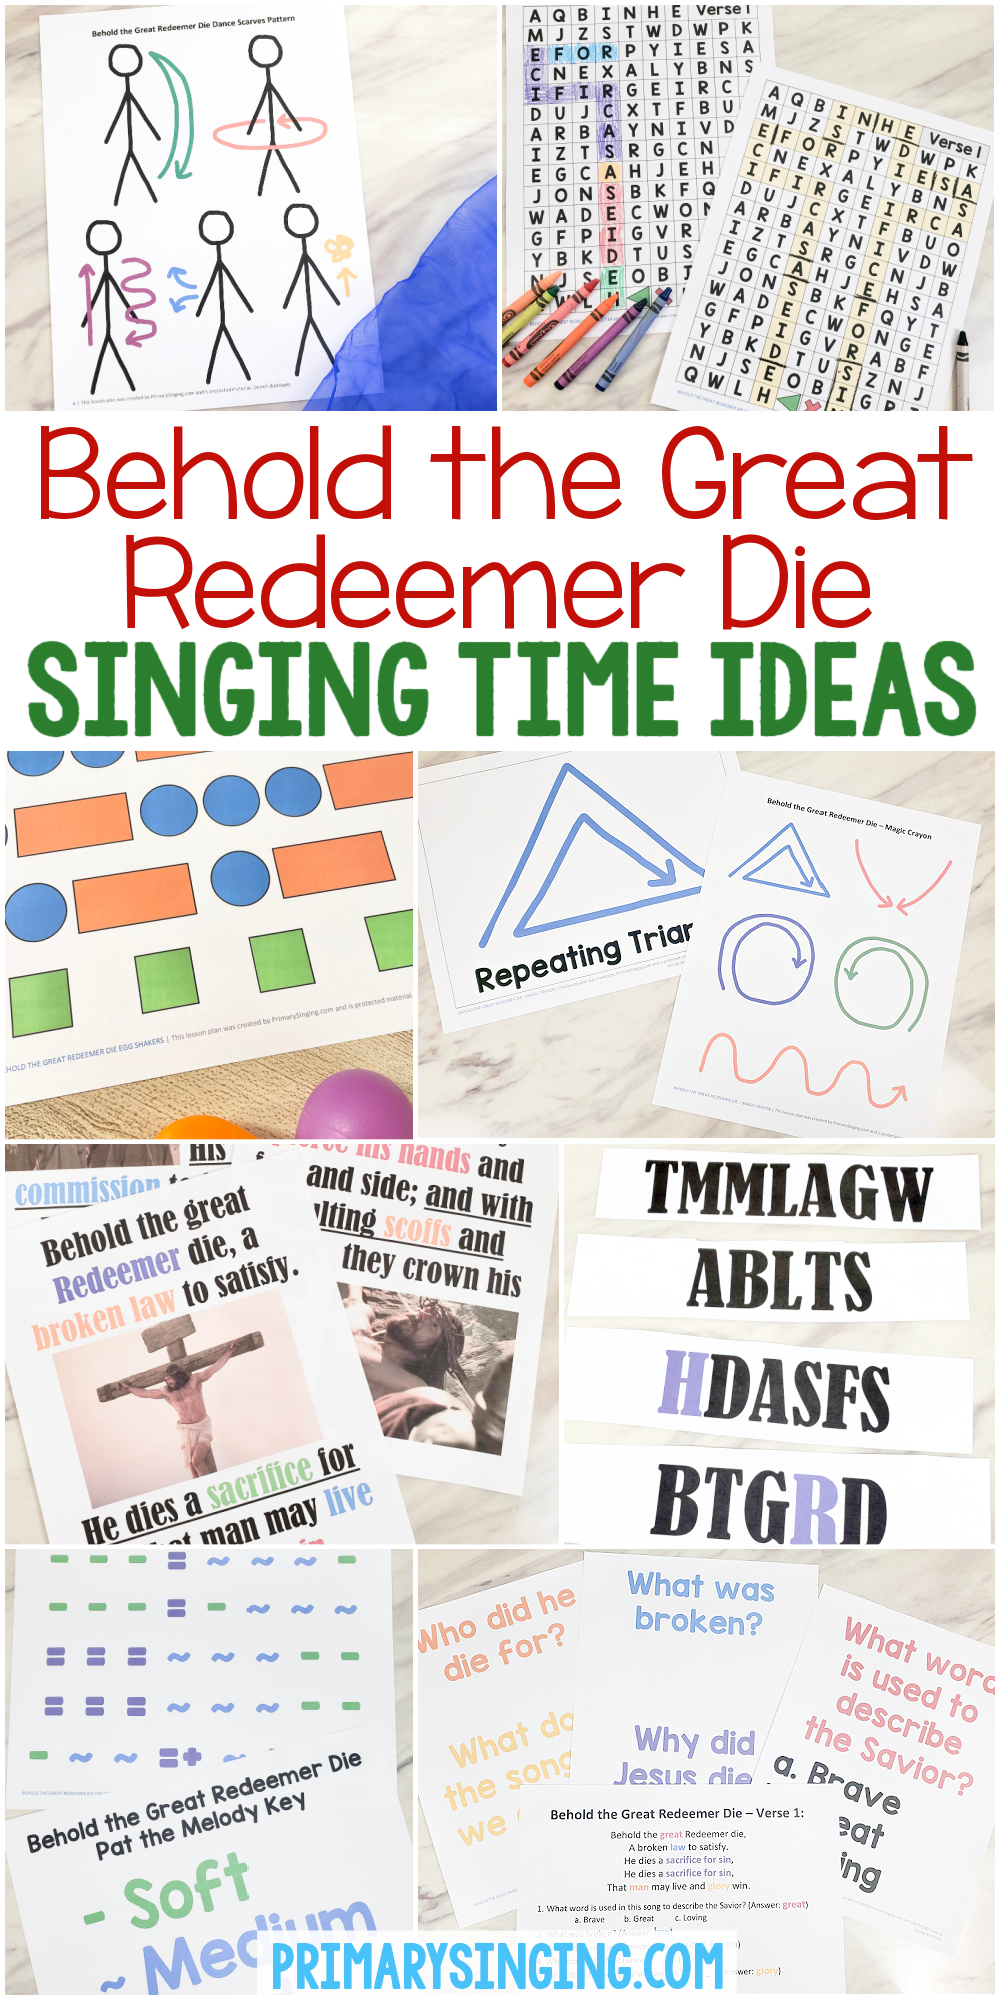 Behold the Great Redeemer Die singing time ideas - tons of fun ways to teach this LDS Hymn to your Primary kids with printable song helps for Primary Music Leaders.